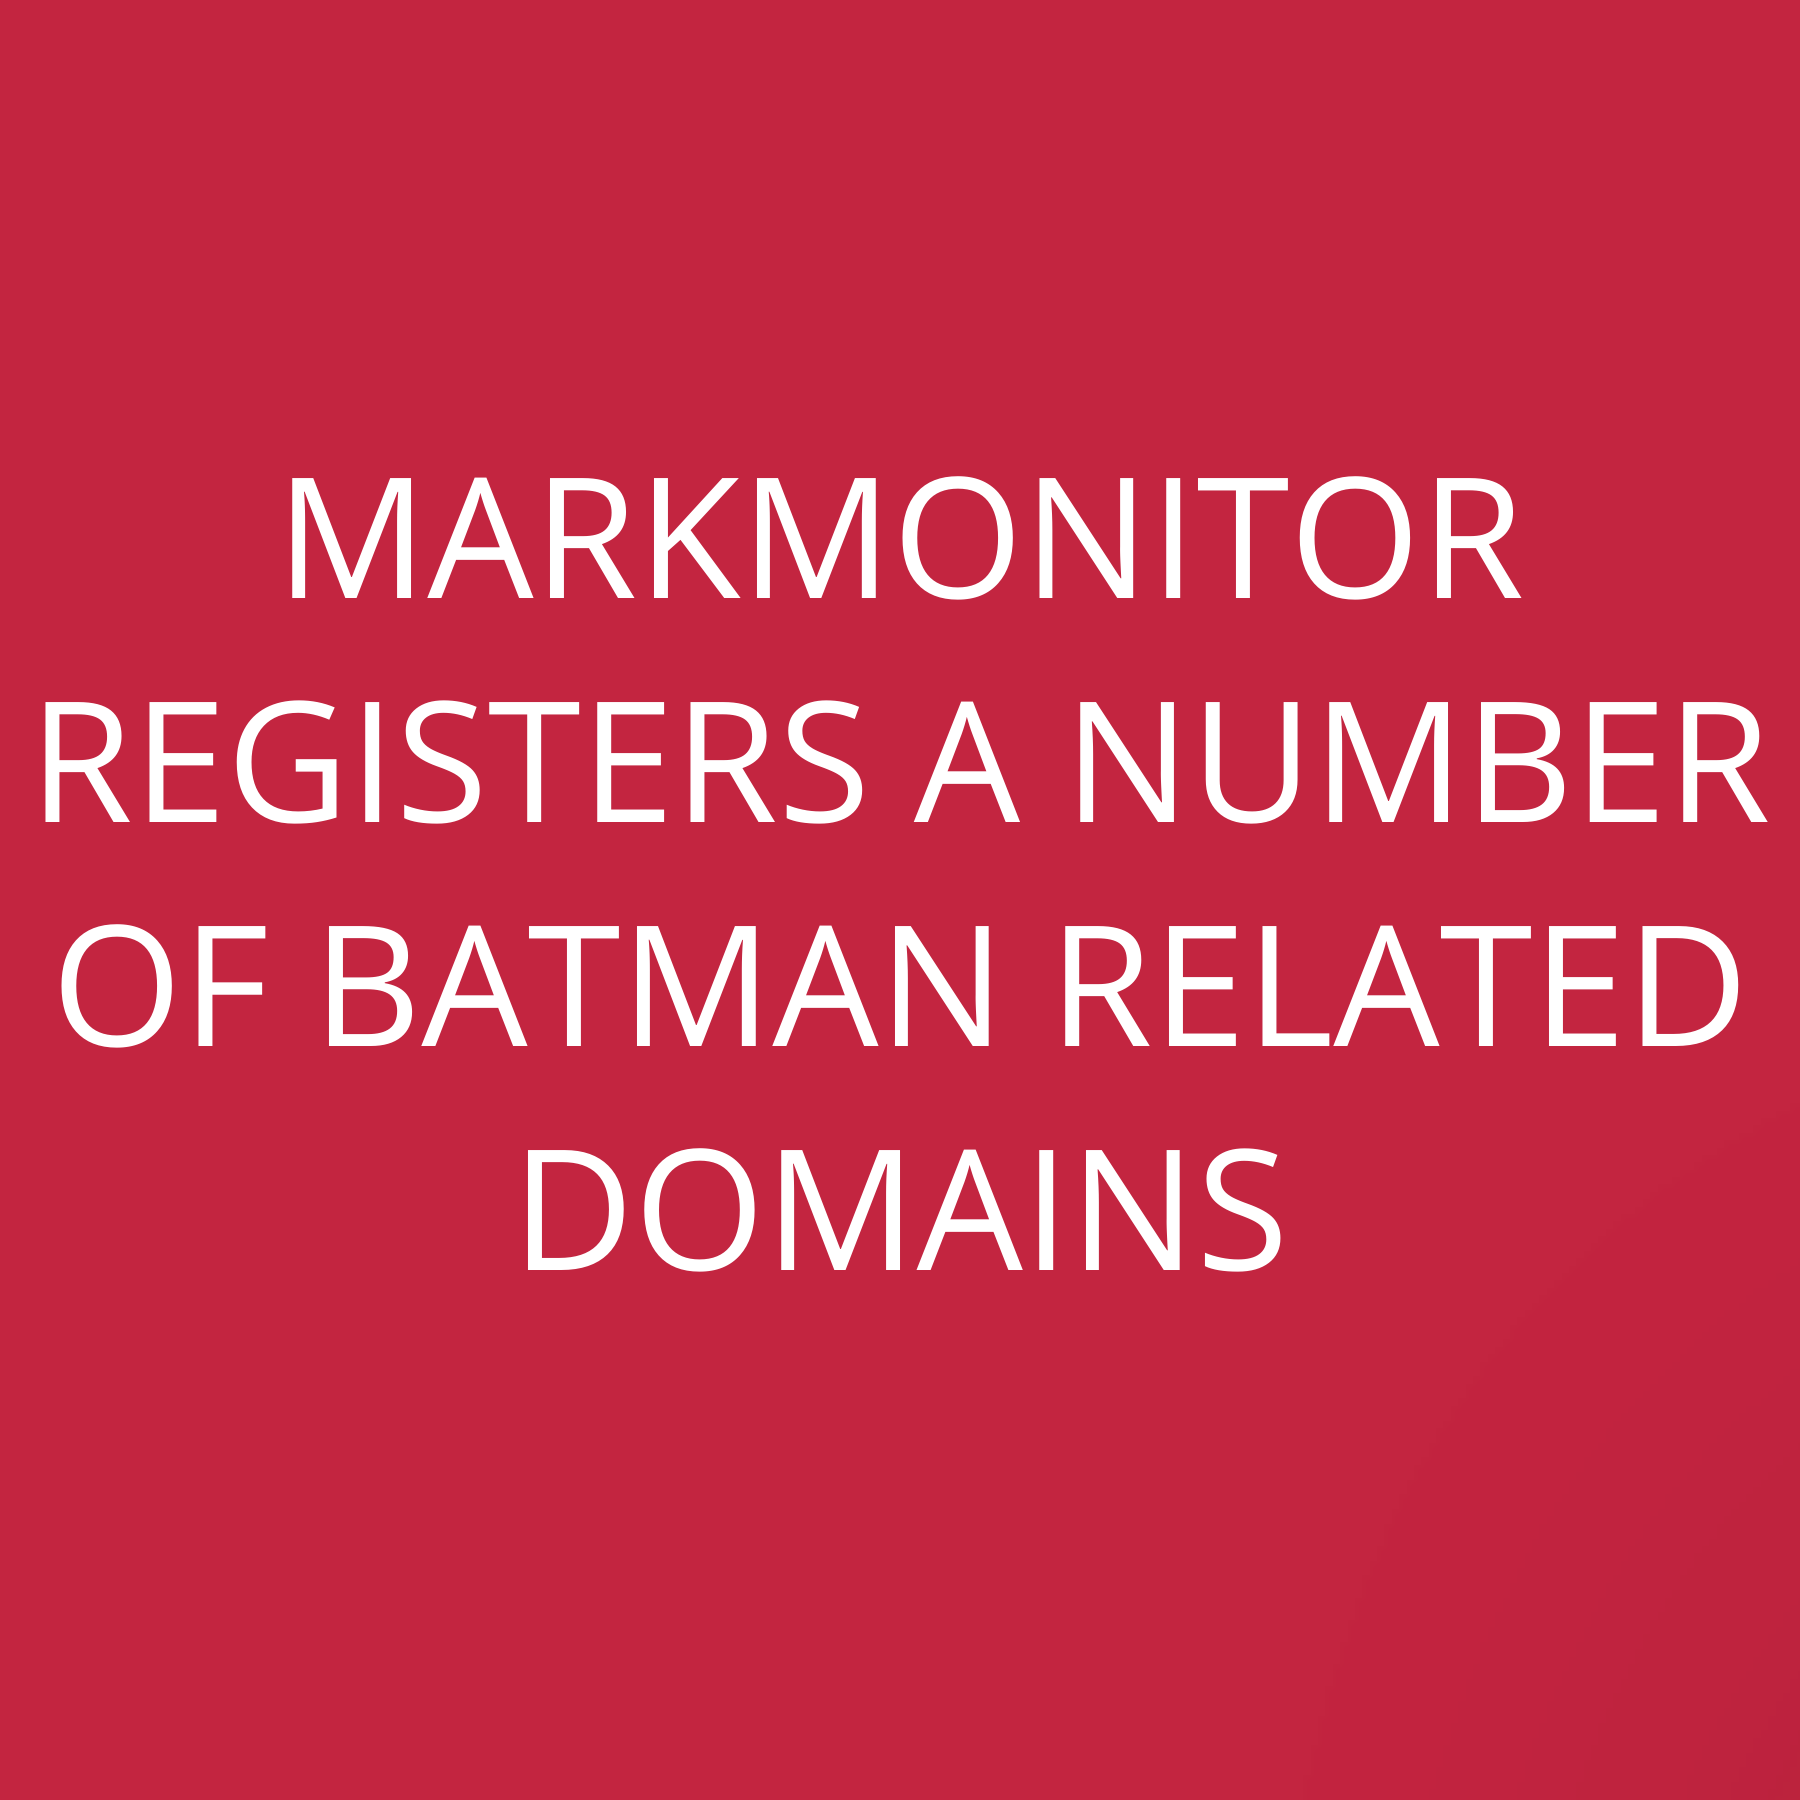 MarkMonitor registers a number of Batman related domains